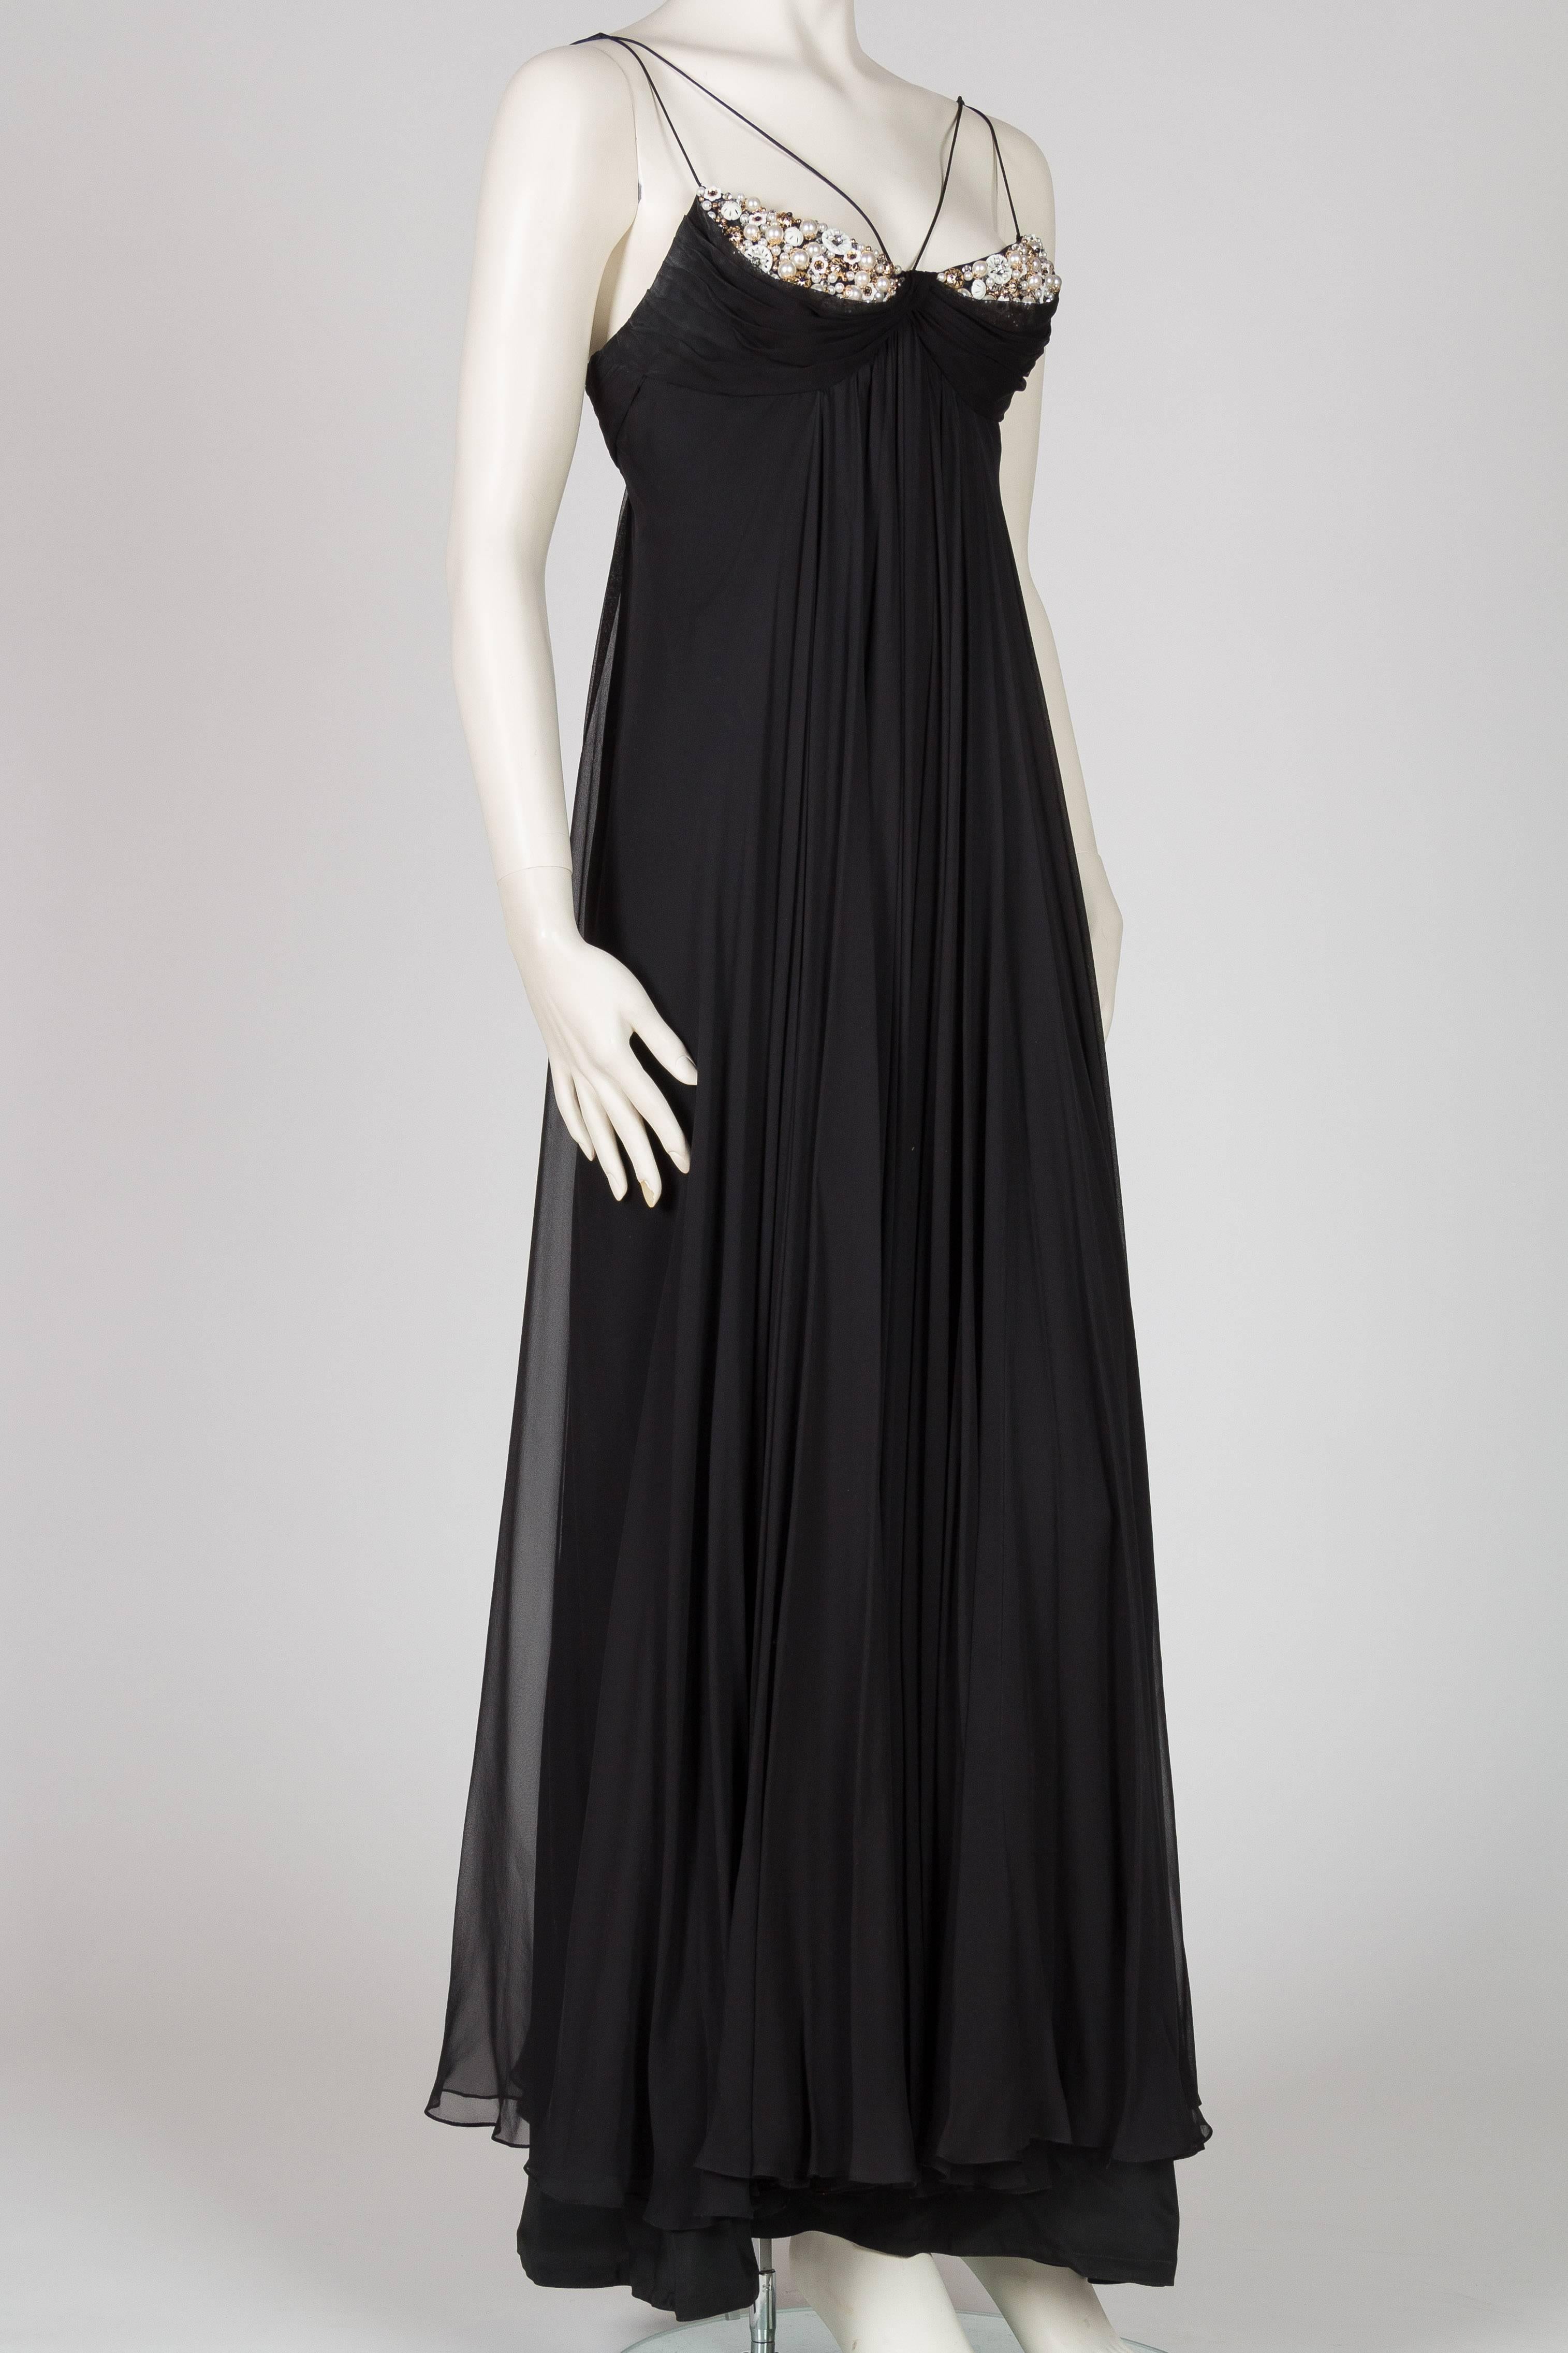 Black 1970s Alfred Bosand Beaded Silk Chiffon Gown with Cape